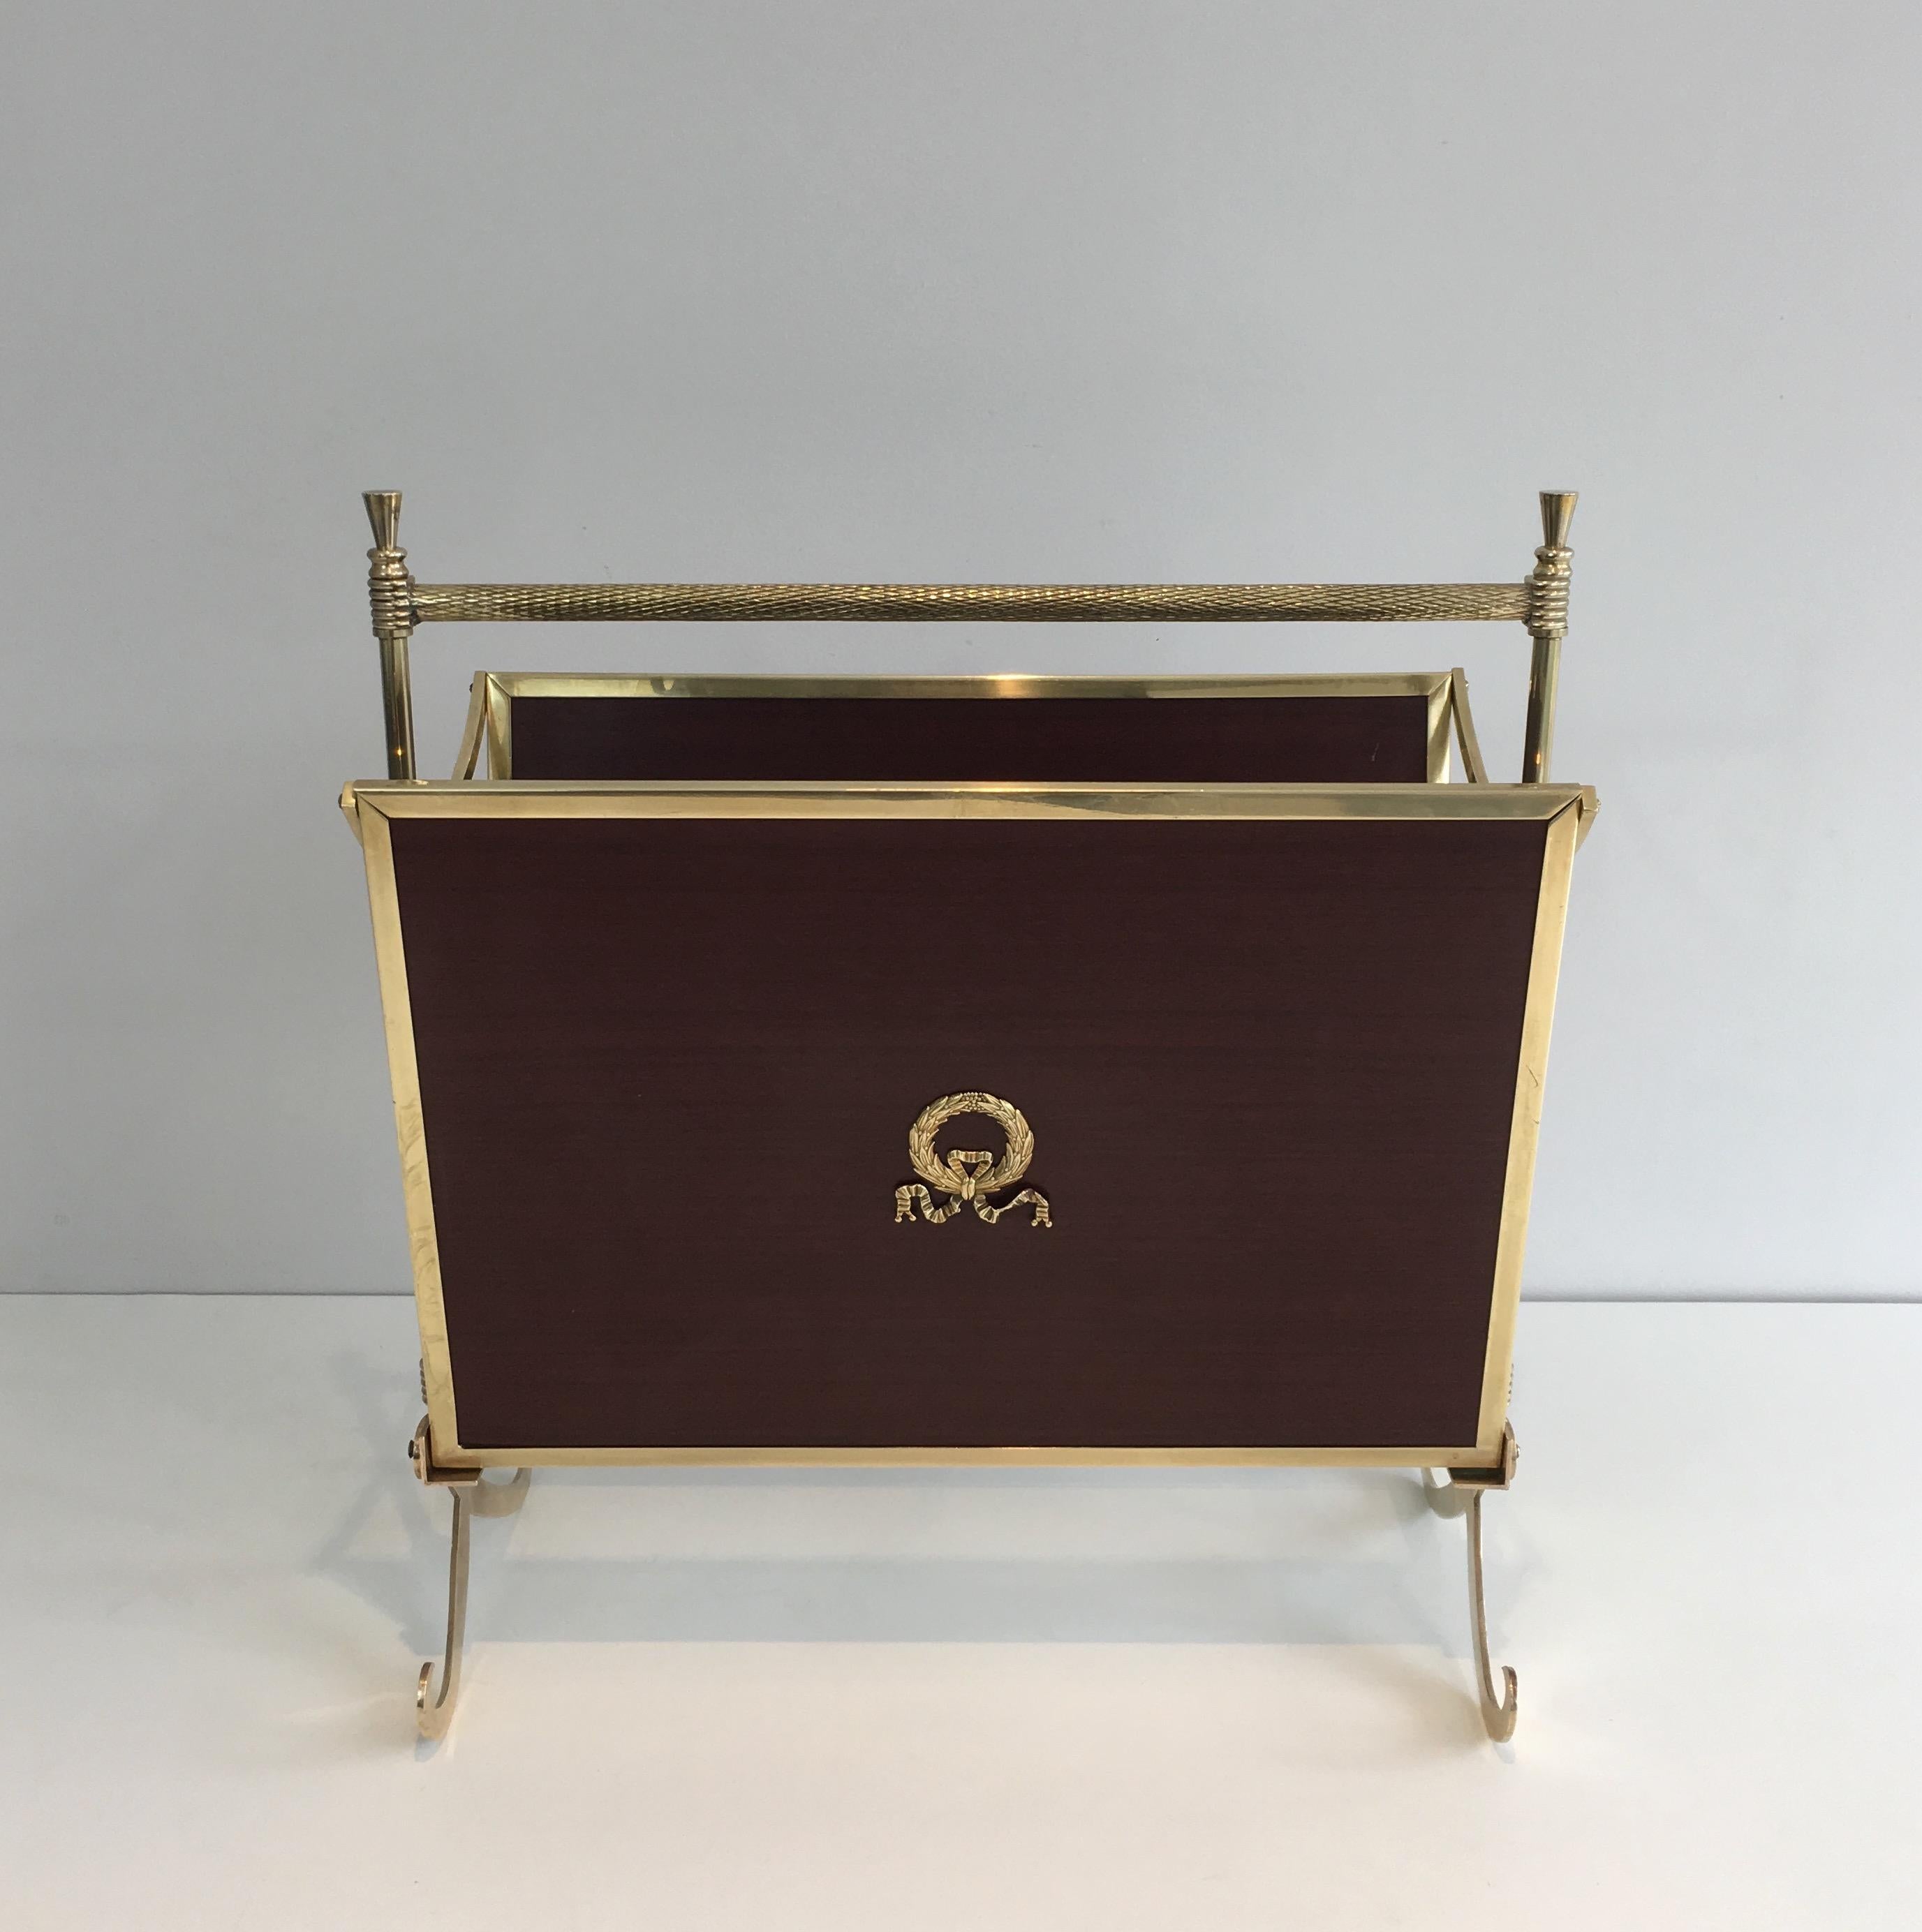 This neoclassical magazine rack is made of mahogany and brass with a glass shelf on the bottom. This piece is attributed to famous French designer Maison Jansen, circa 1940.